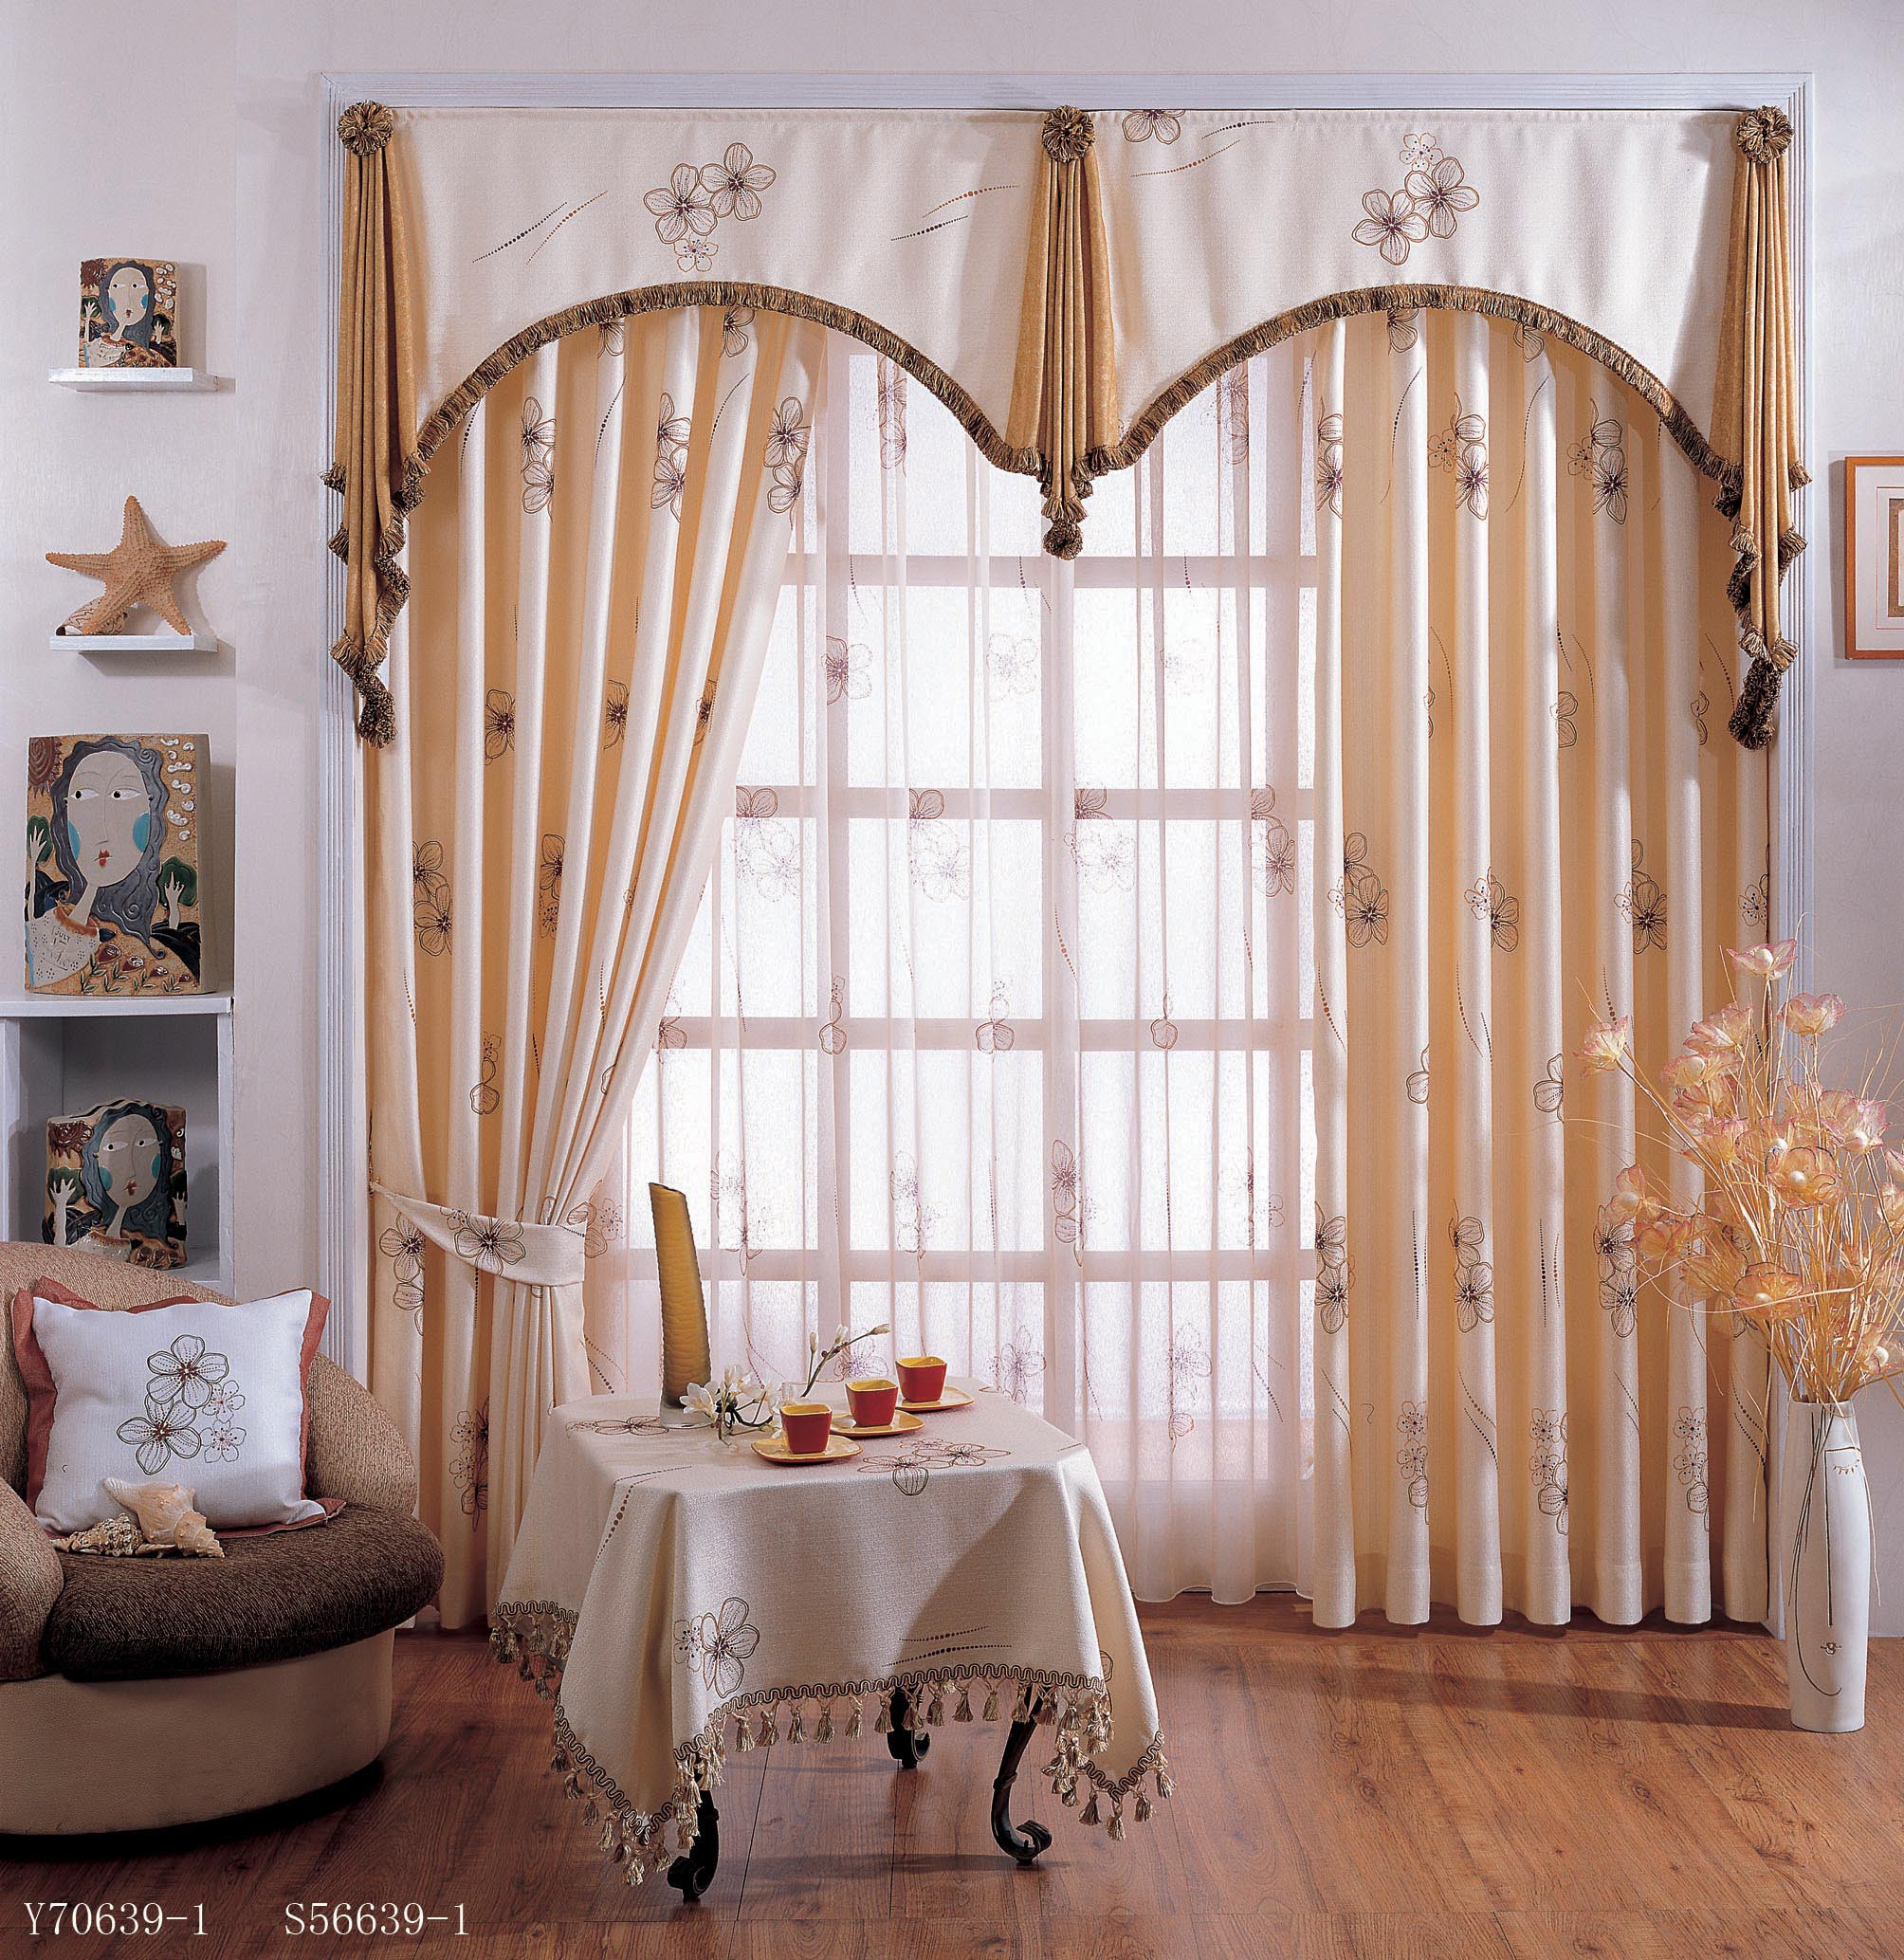 Living Room Curtains With Valance
 Valances For Living Room Ideas – Modern House